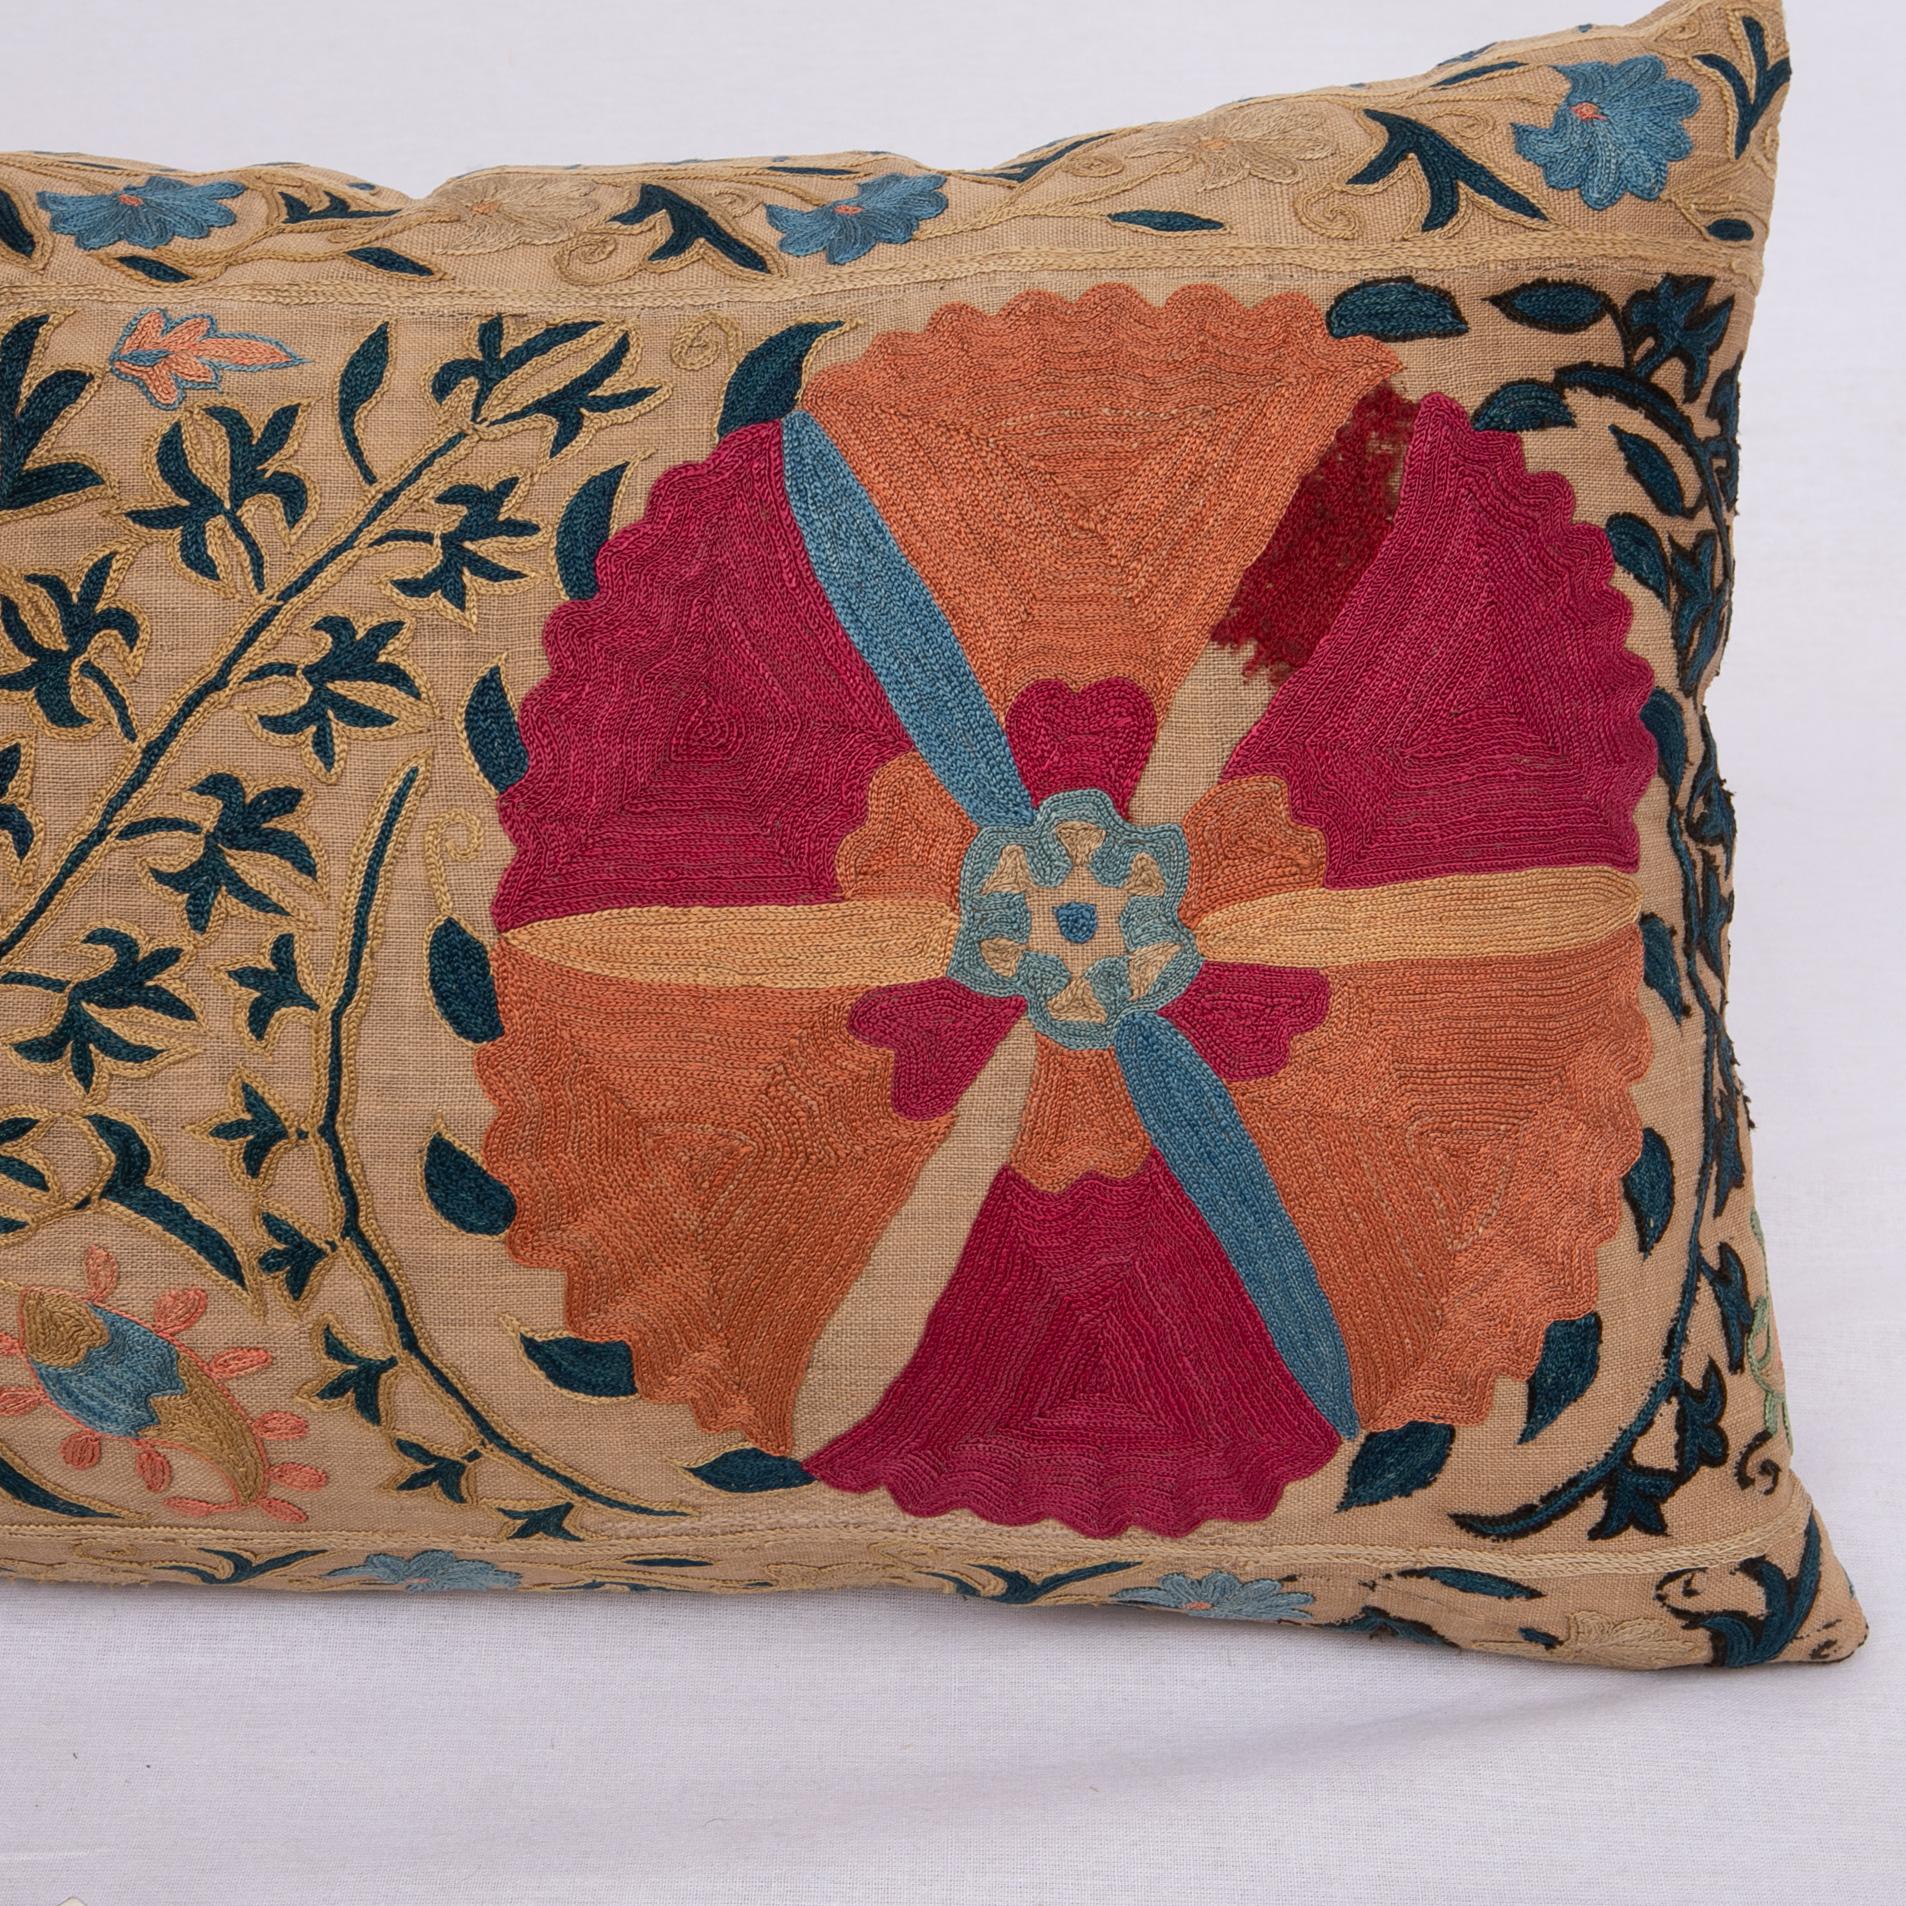 Embroidered Antique Suzani Pillowcase / Cushion Cover Made from a Mid 19th c Suzani